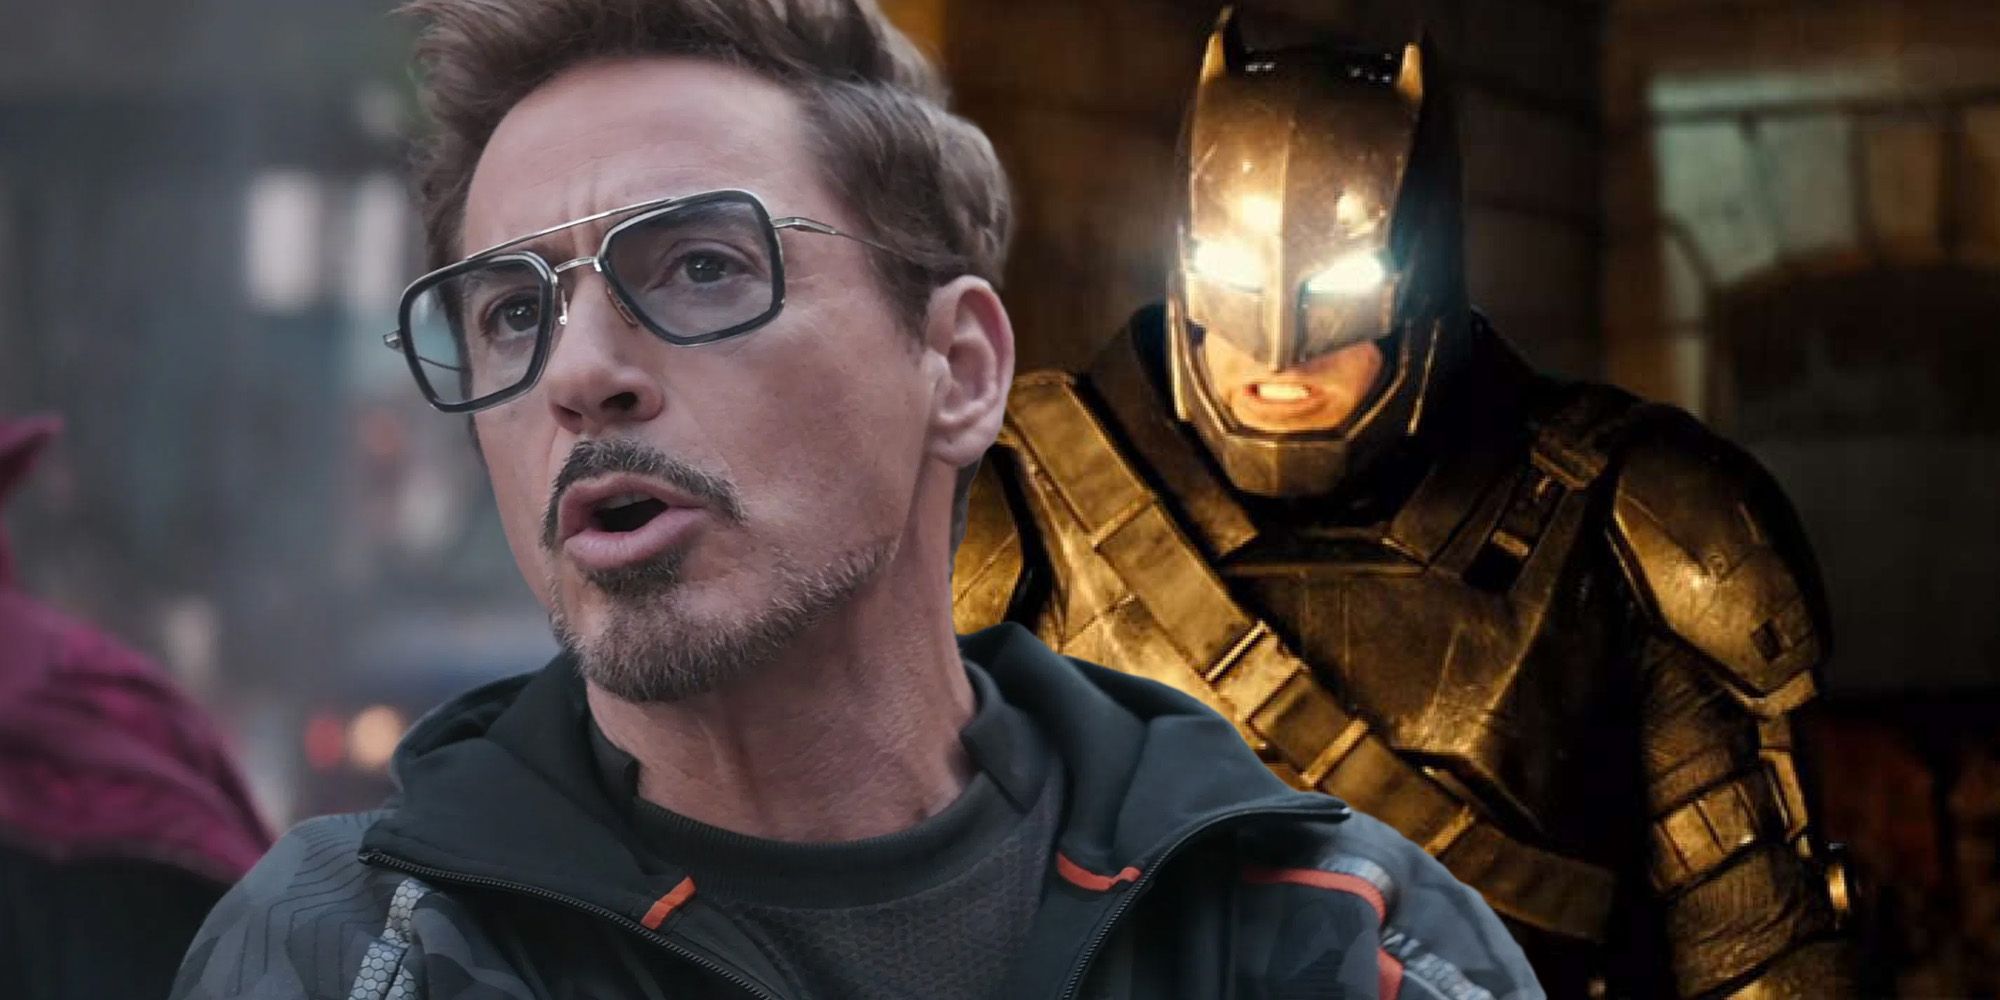 An image of Robert Downey Jr. wearing sunglasses and Batman looking angry